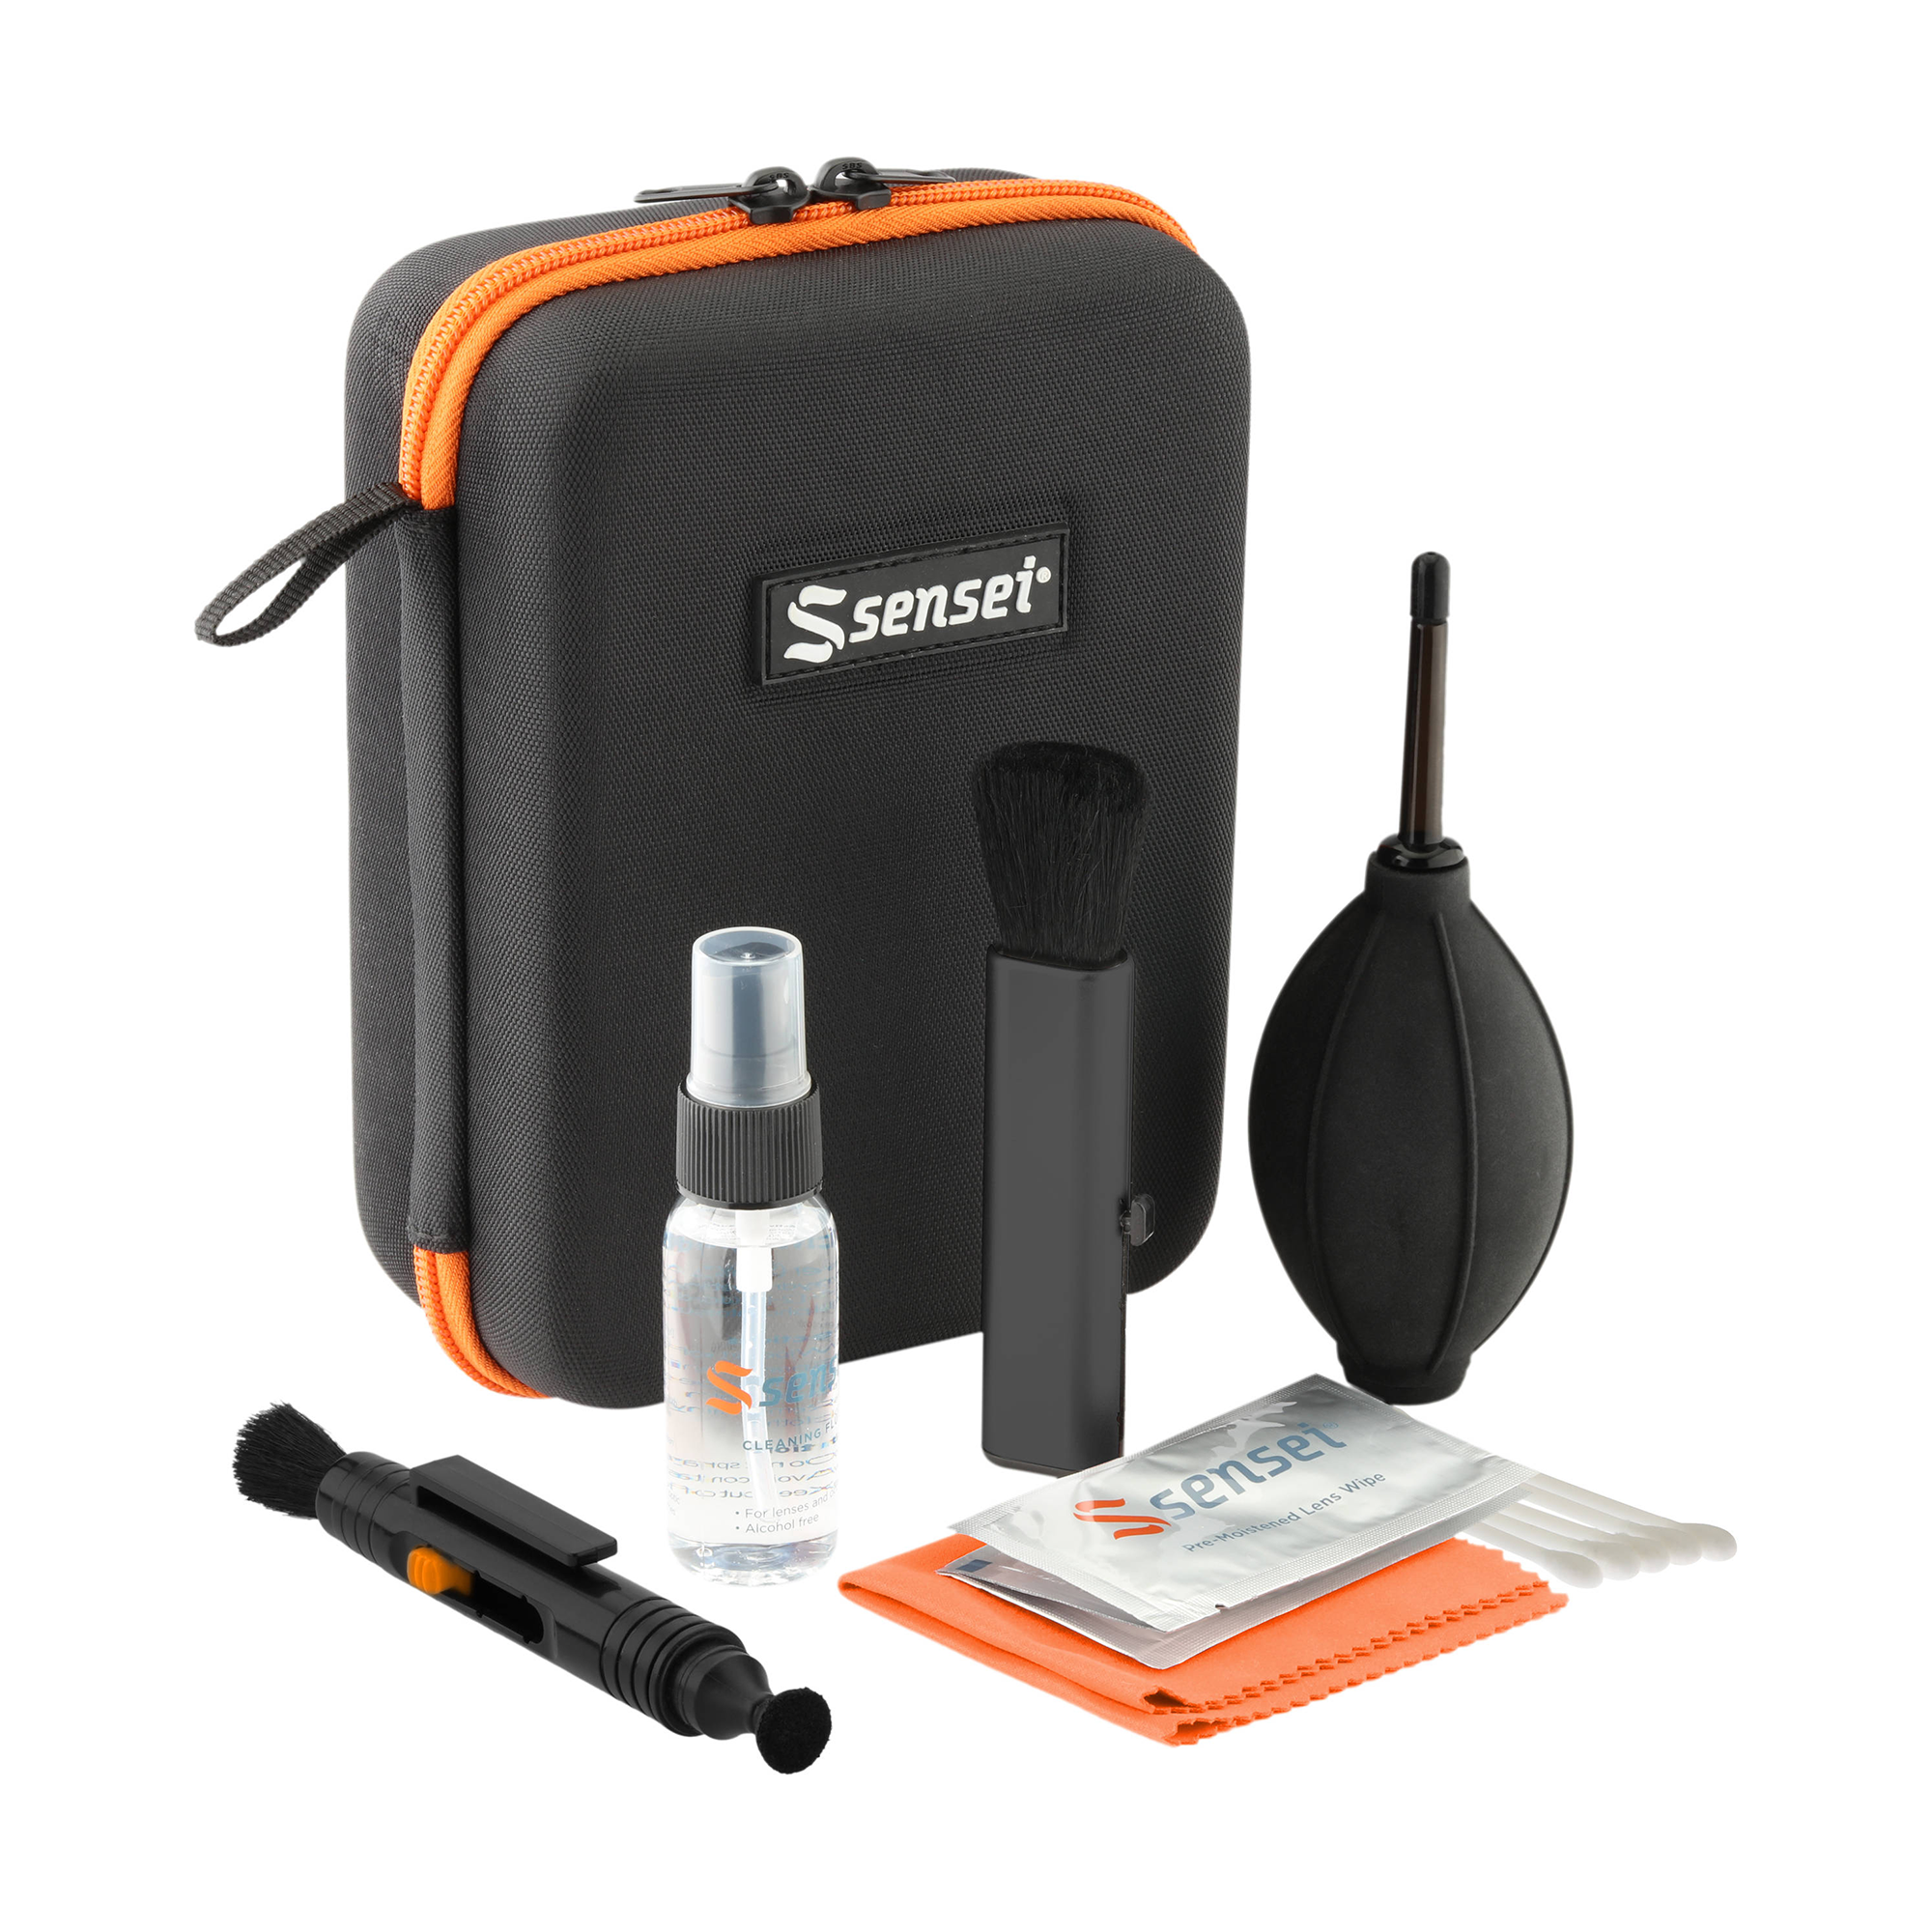 Sensei DOC-CK Deluxe Optics Care and Cleaning Kit